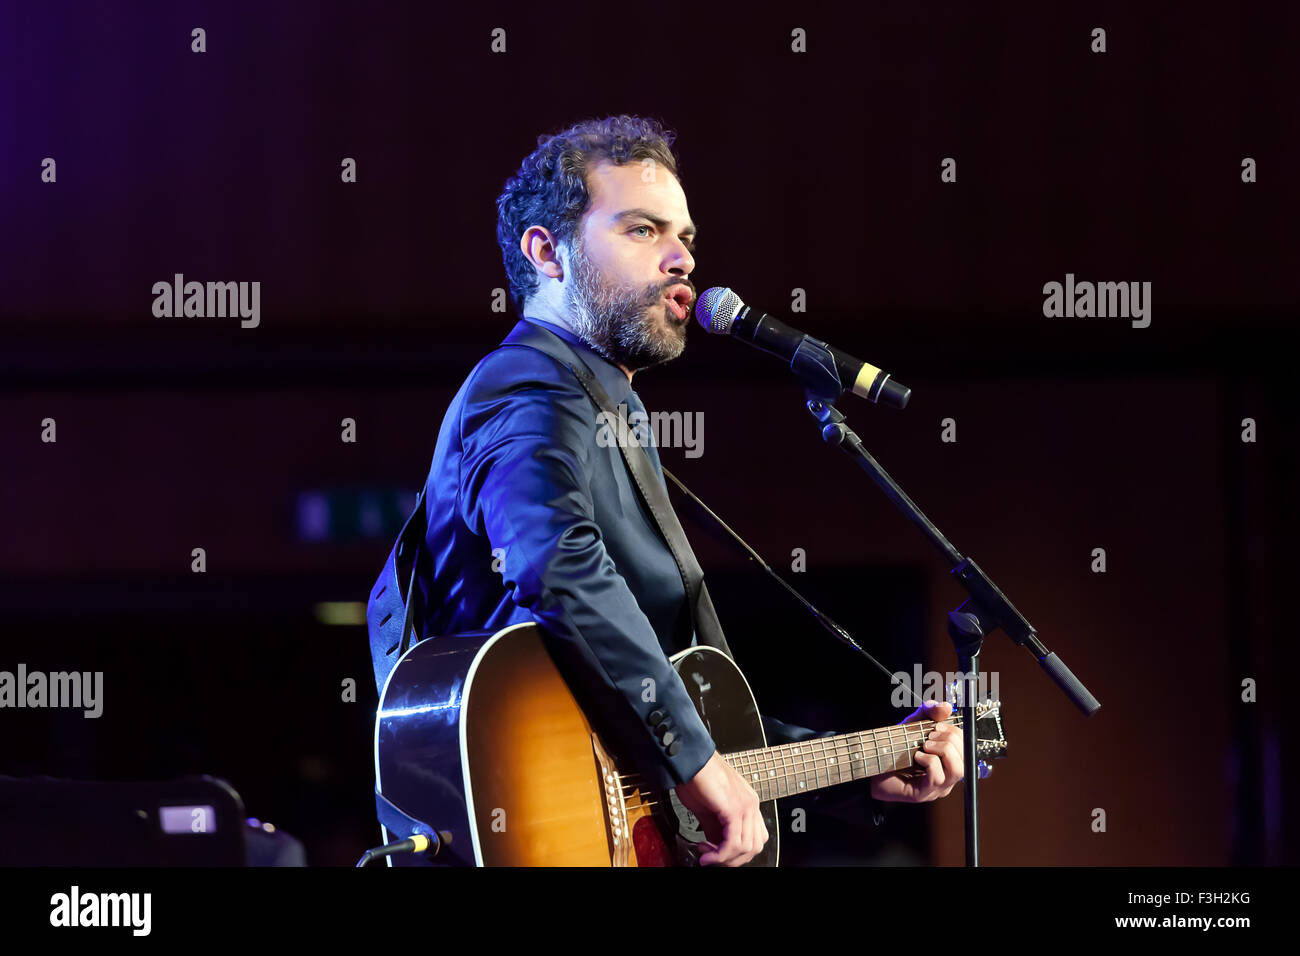 Rome, Italy - May 6, 2015: The comedian Andrea Perroni performs with his show of imitation during a concert by the Band of the State Police. Stock Photo